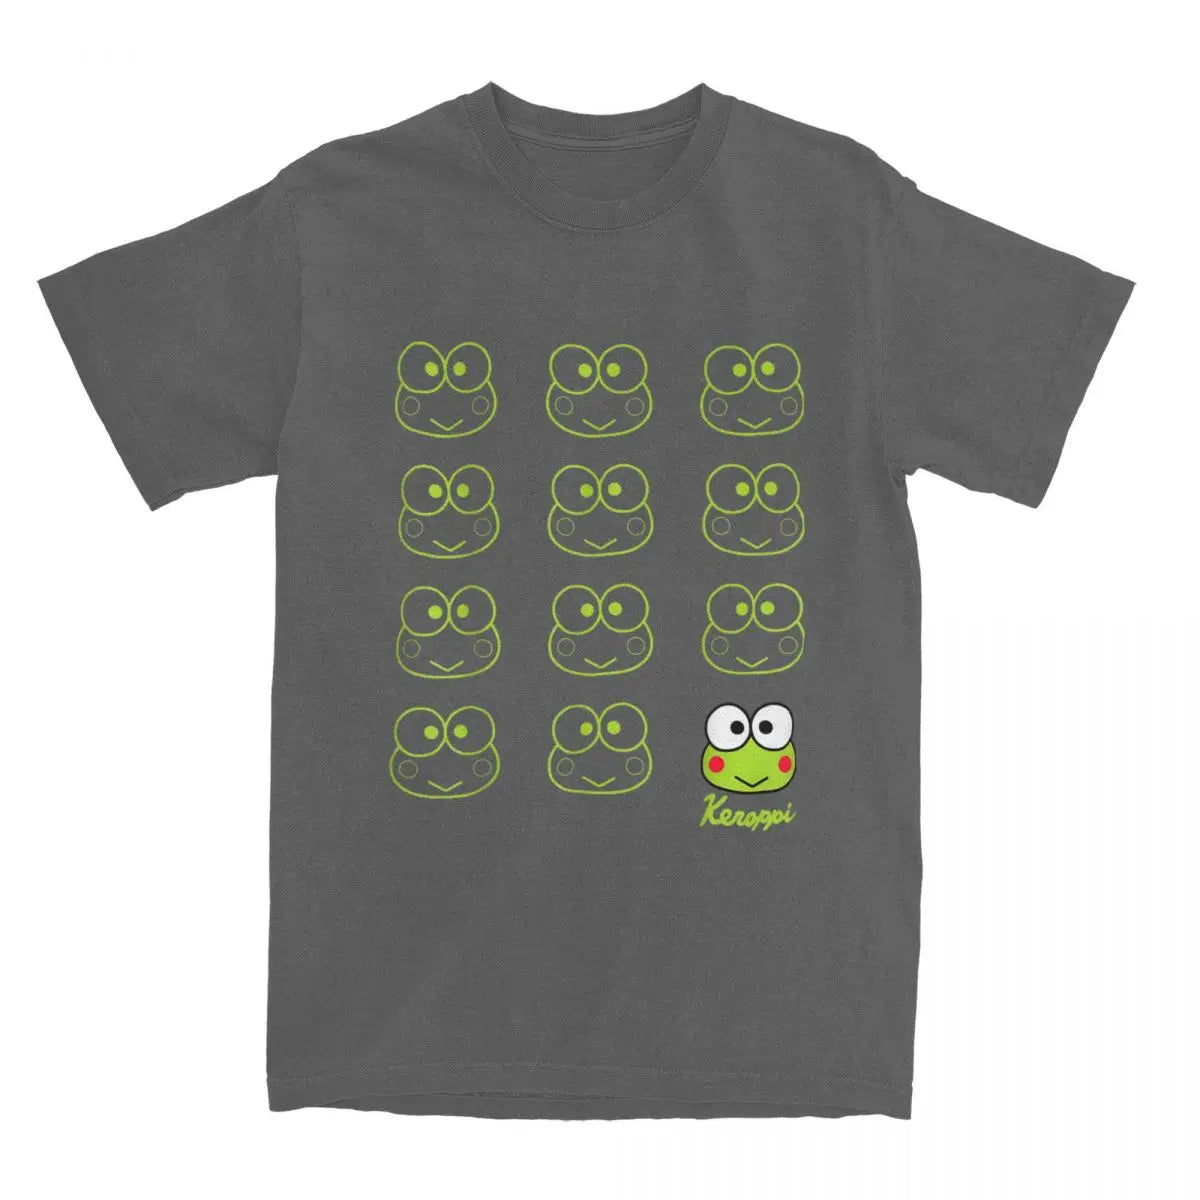 Become the cutest around with our new Keroppi Kaleidoscope Tee | Here at Everythinganimee we have the worlds best anime merch | Free Global Shipping